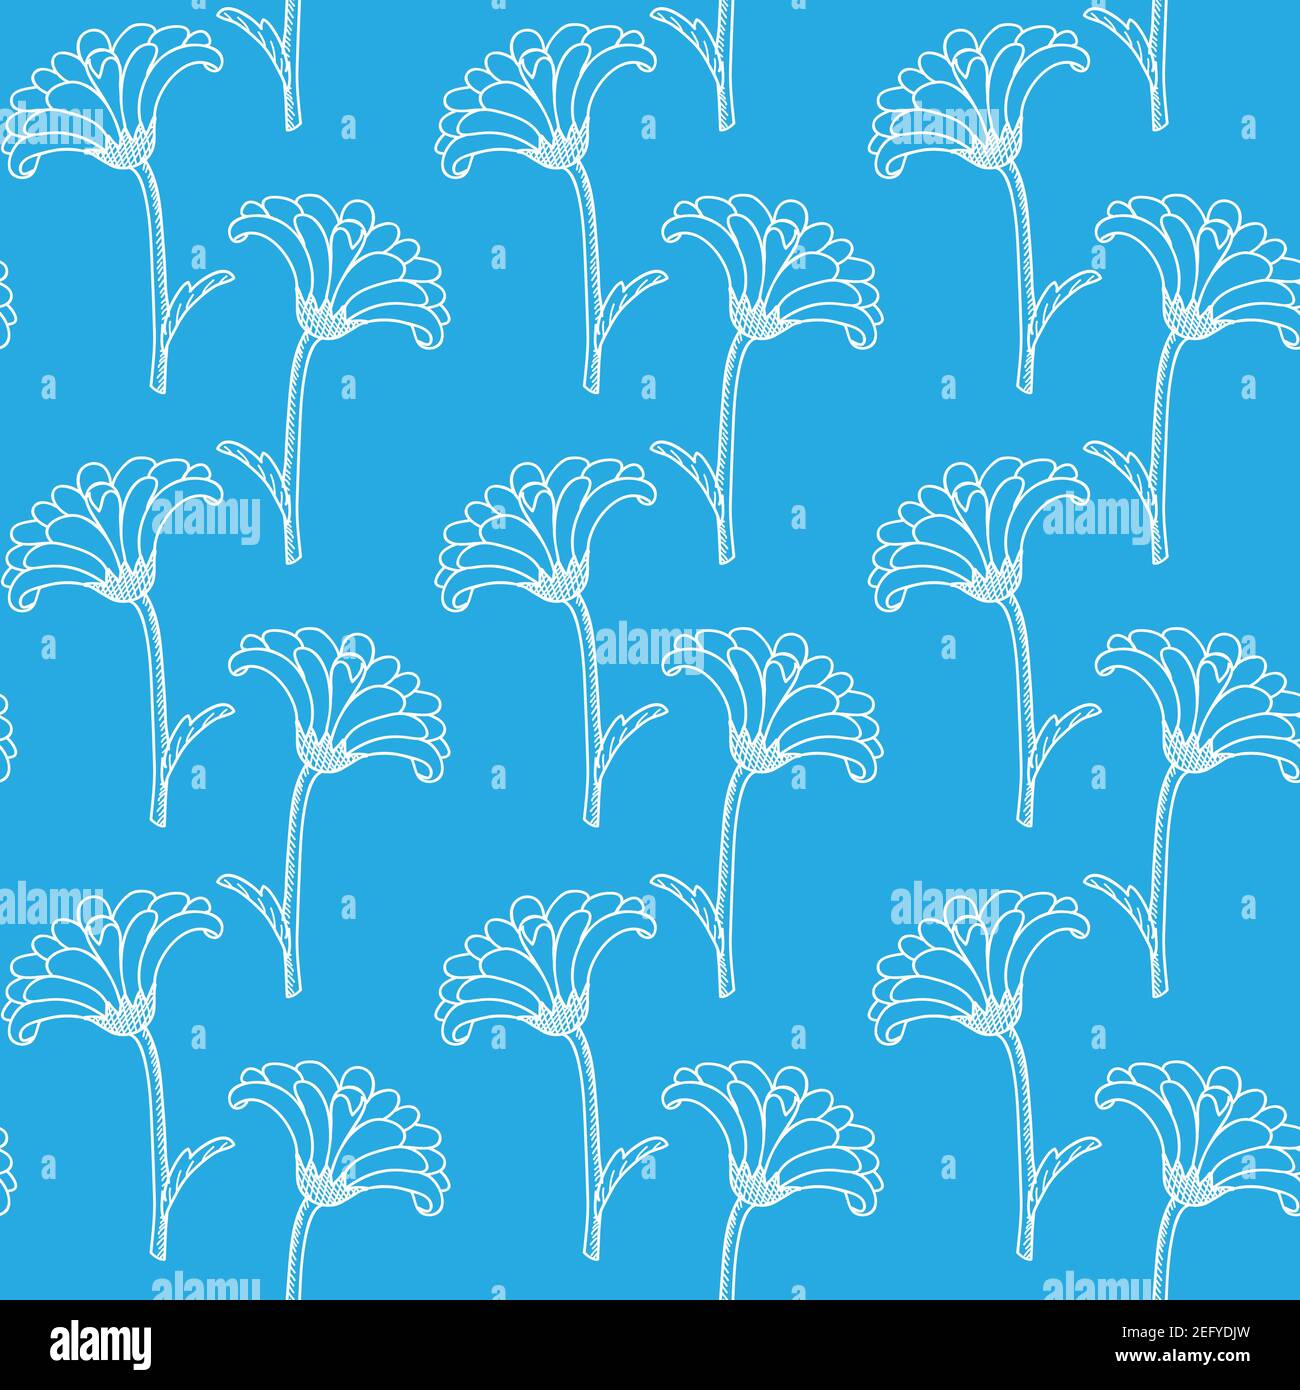 Seamless floral pattern with chrysanthemums over blue Stock Vector